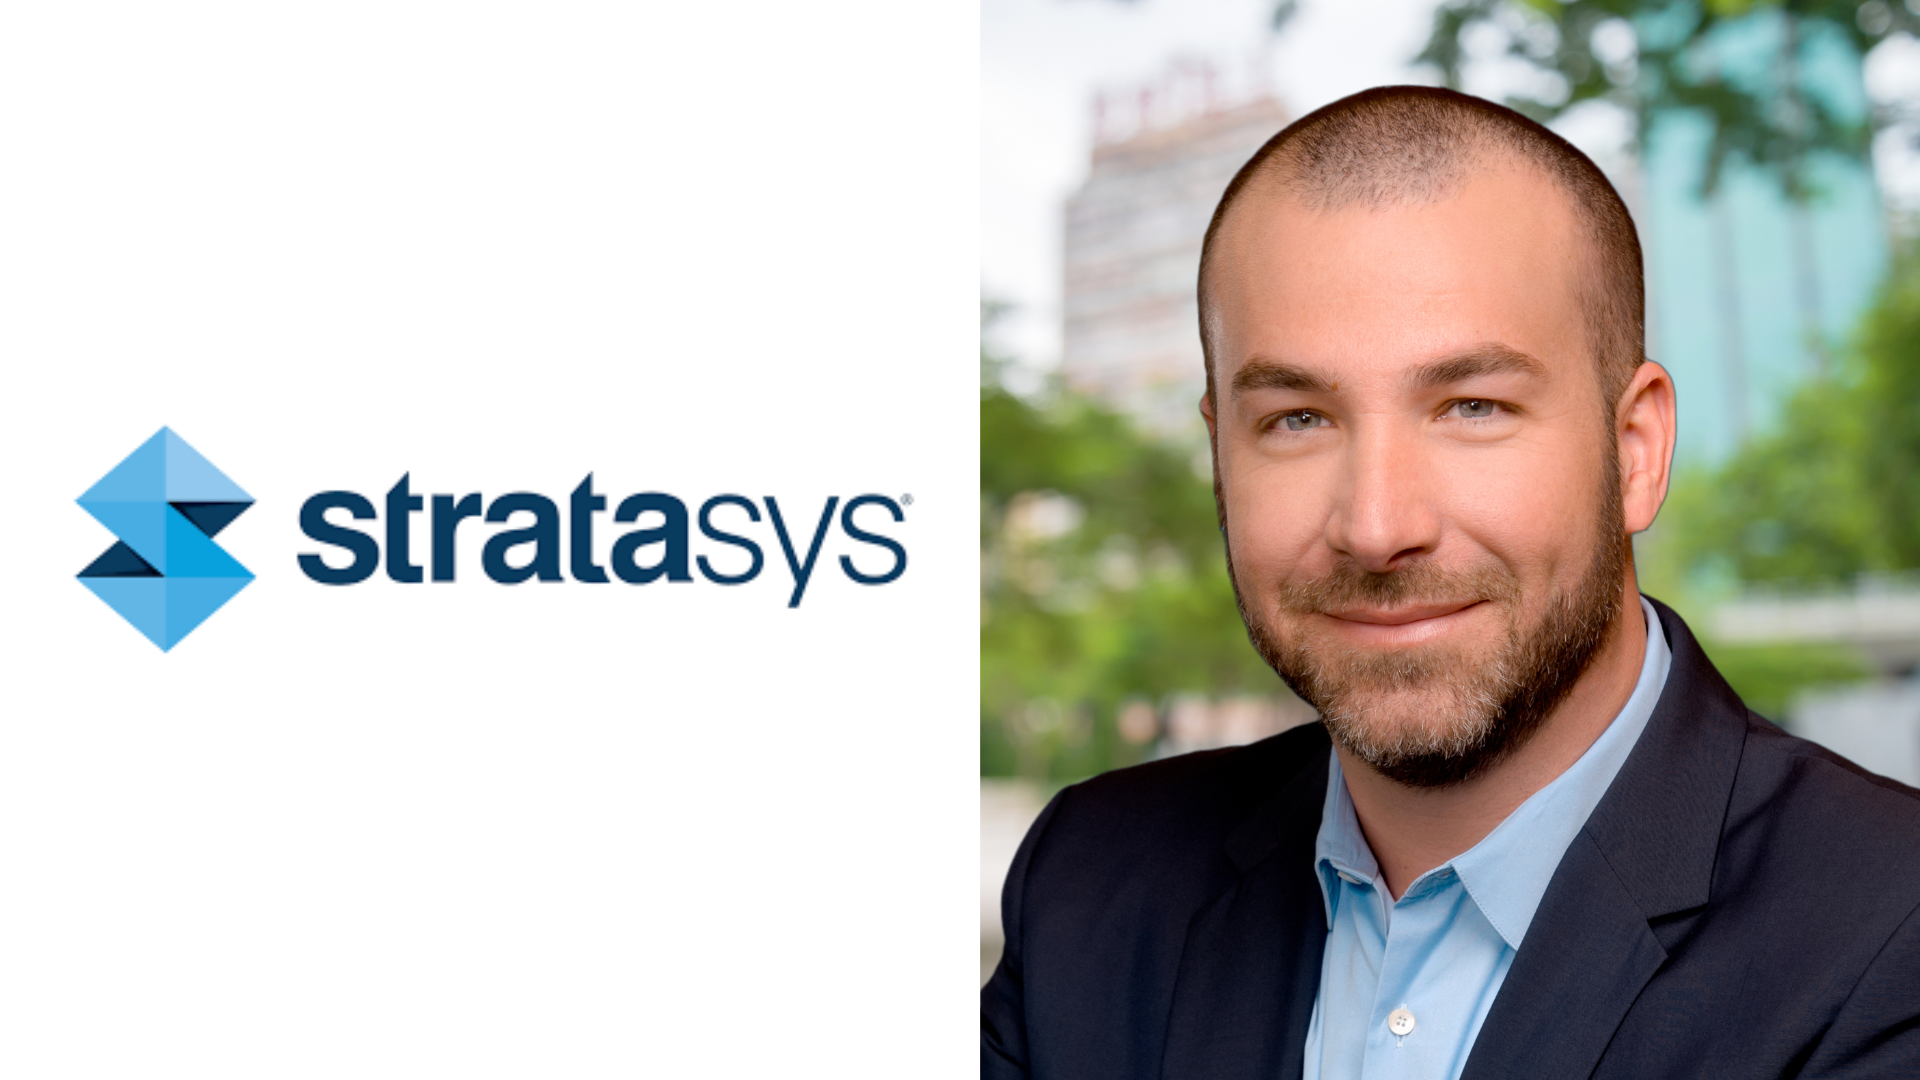 Stratasys announced that Christian Alvarez has joined the company as its new Chief Revenue Officer, reporting to CEO Dr. Yoav Zeif.